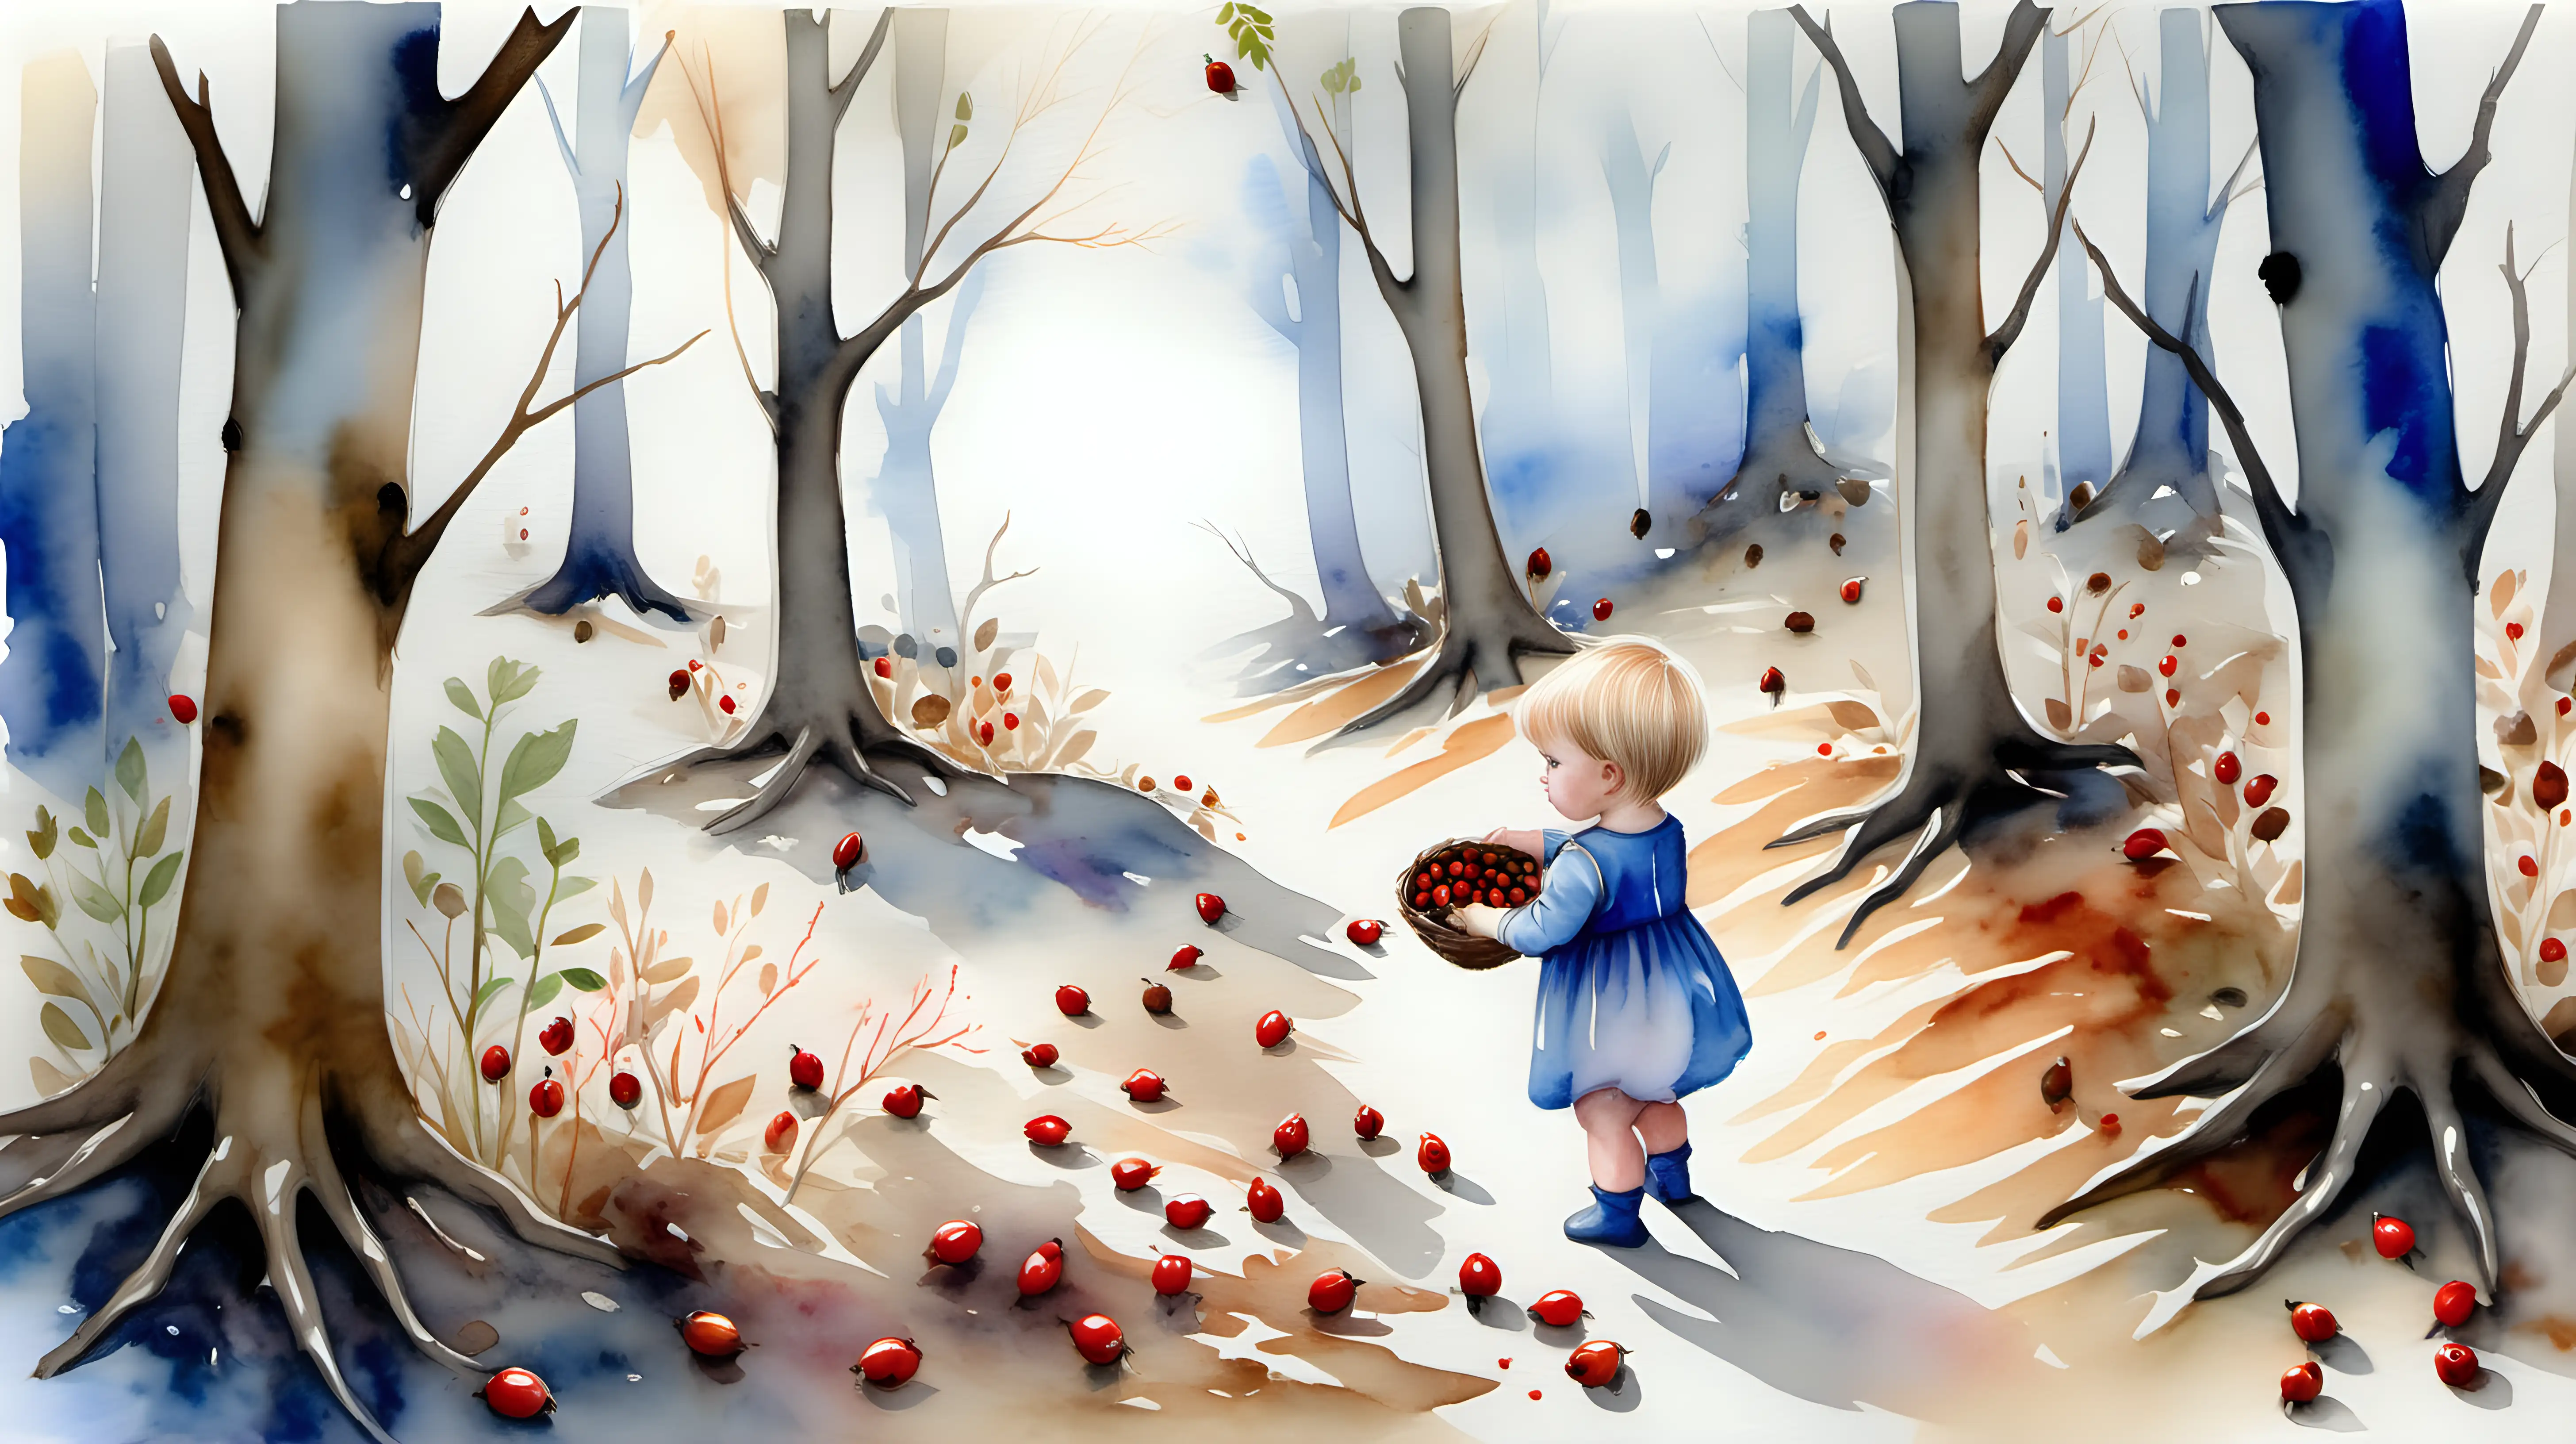 Watercolour fairytale painting. An fairytale wood. in the distance A 1yr old beautiful dark blonde blueeyed baby girl with loose short hair is collecting rosehips and acorns